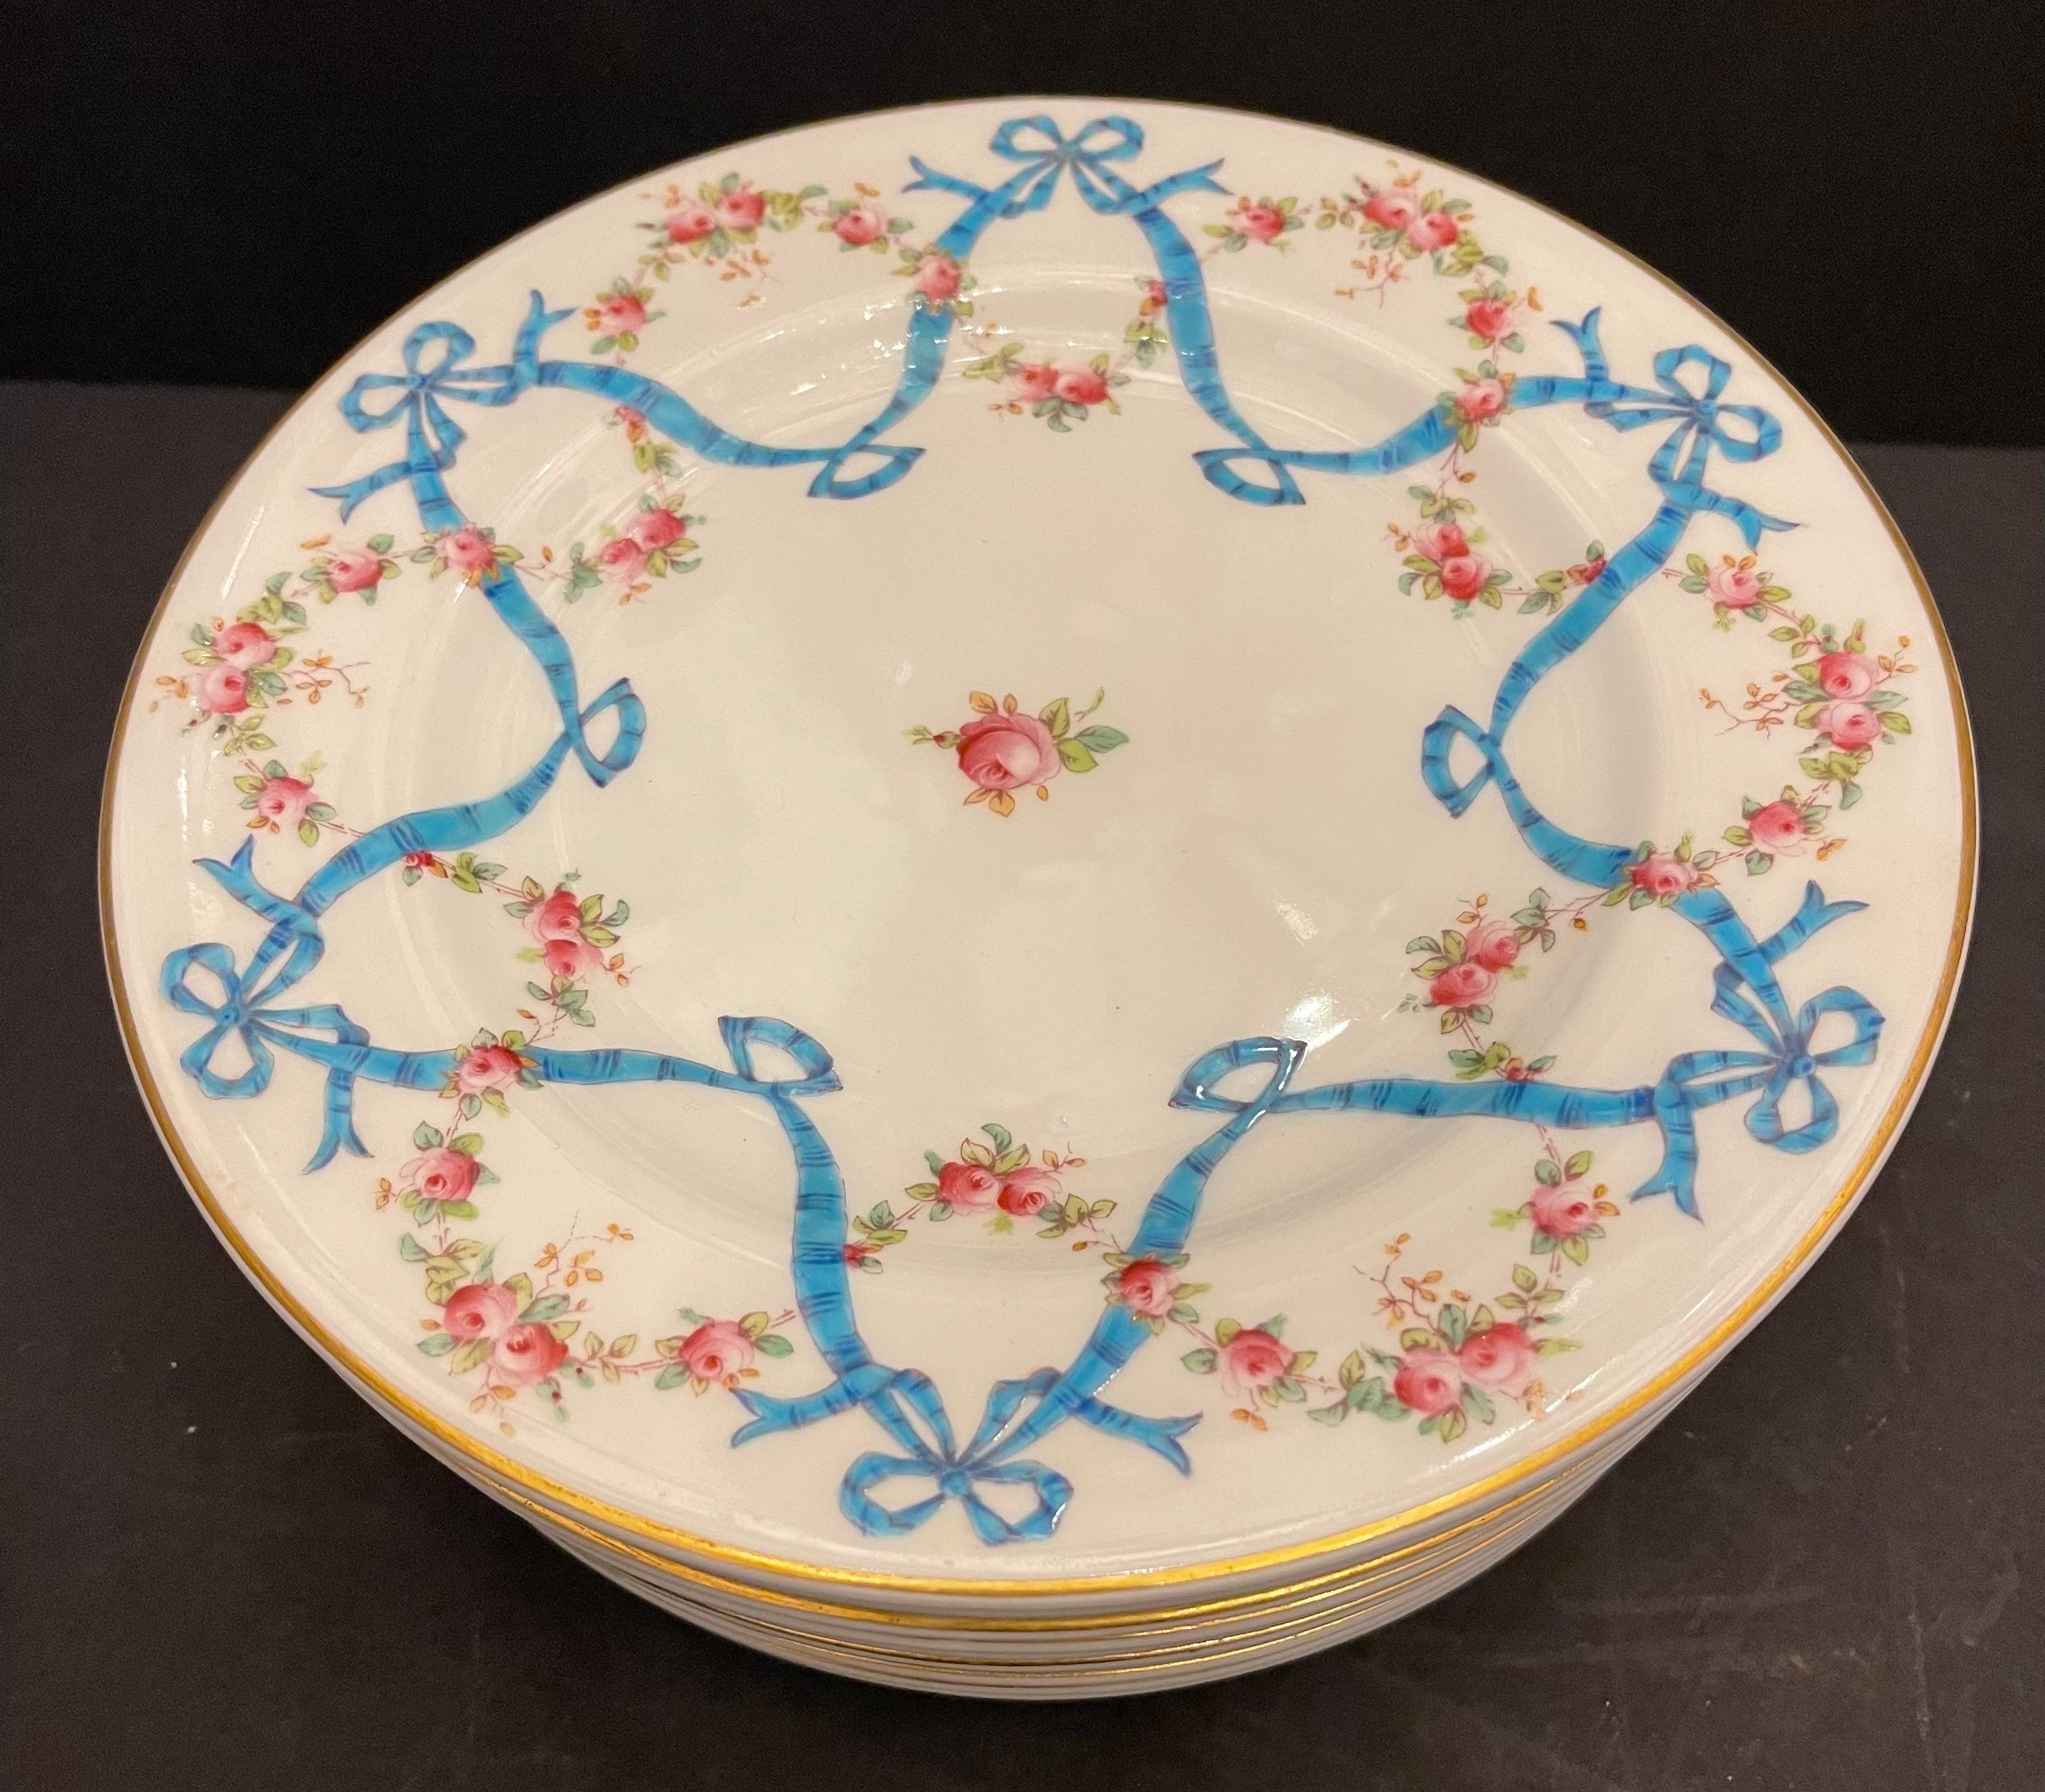 Wonderful Coalport England Turquise Bows And Roses & Flower Swags Raised Enameled Set Of 10 Desert Plates, Retailed By J.E. Caldwell.
 